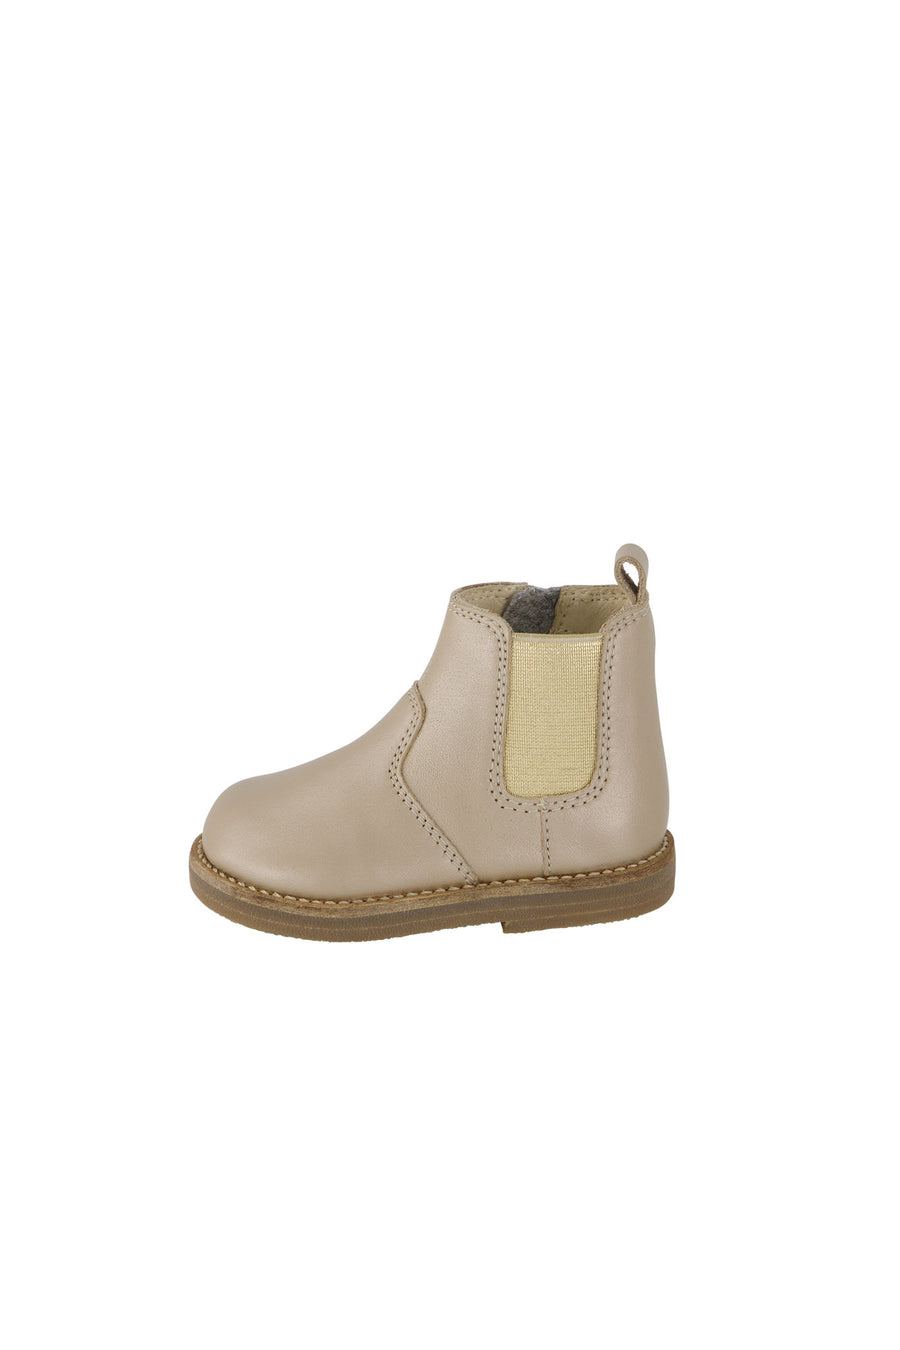 Leather Boot with Elastic Side - Matt Gold Childrens Footwear from Jamie Kay NZ